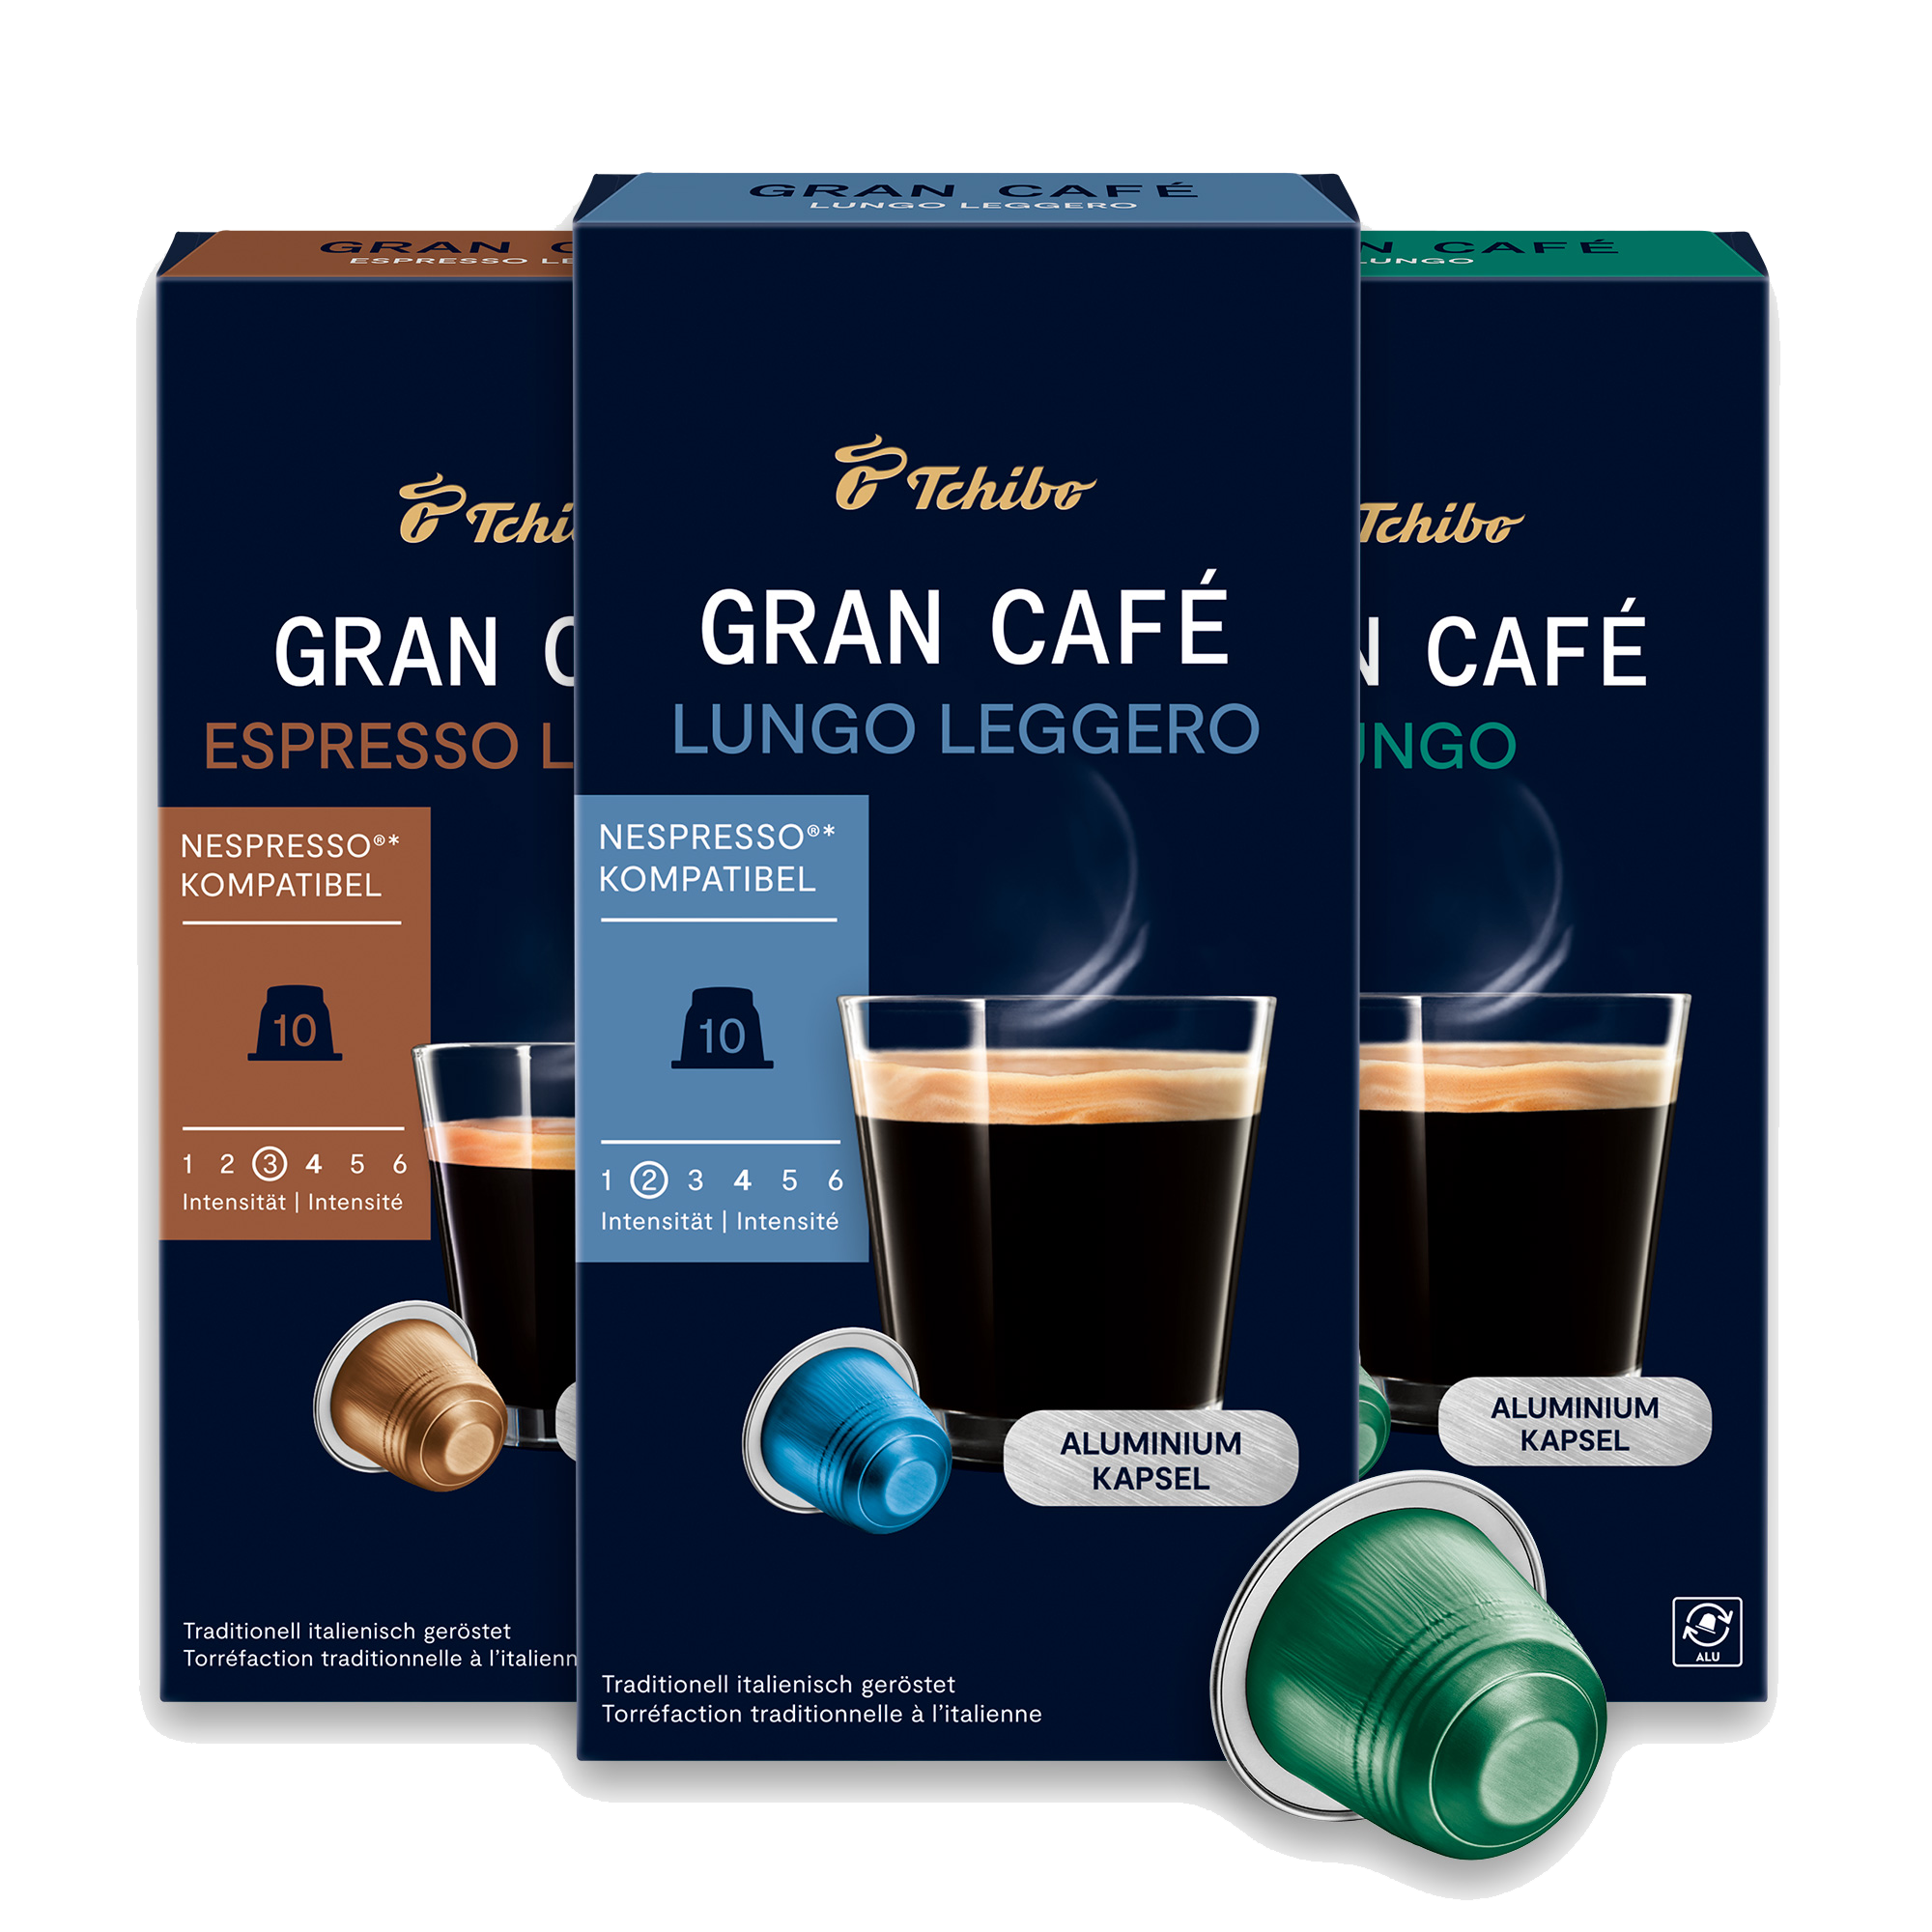 L'OR Espresso  Coffee, coffee pods, beans & instant coffee